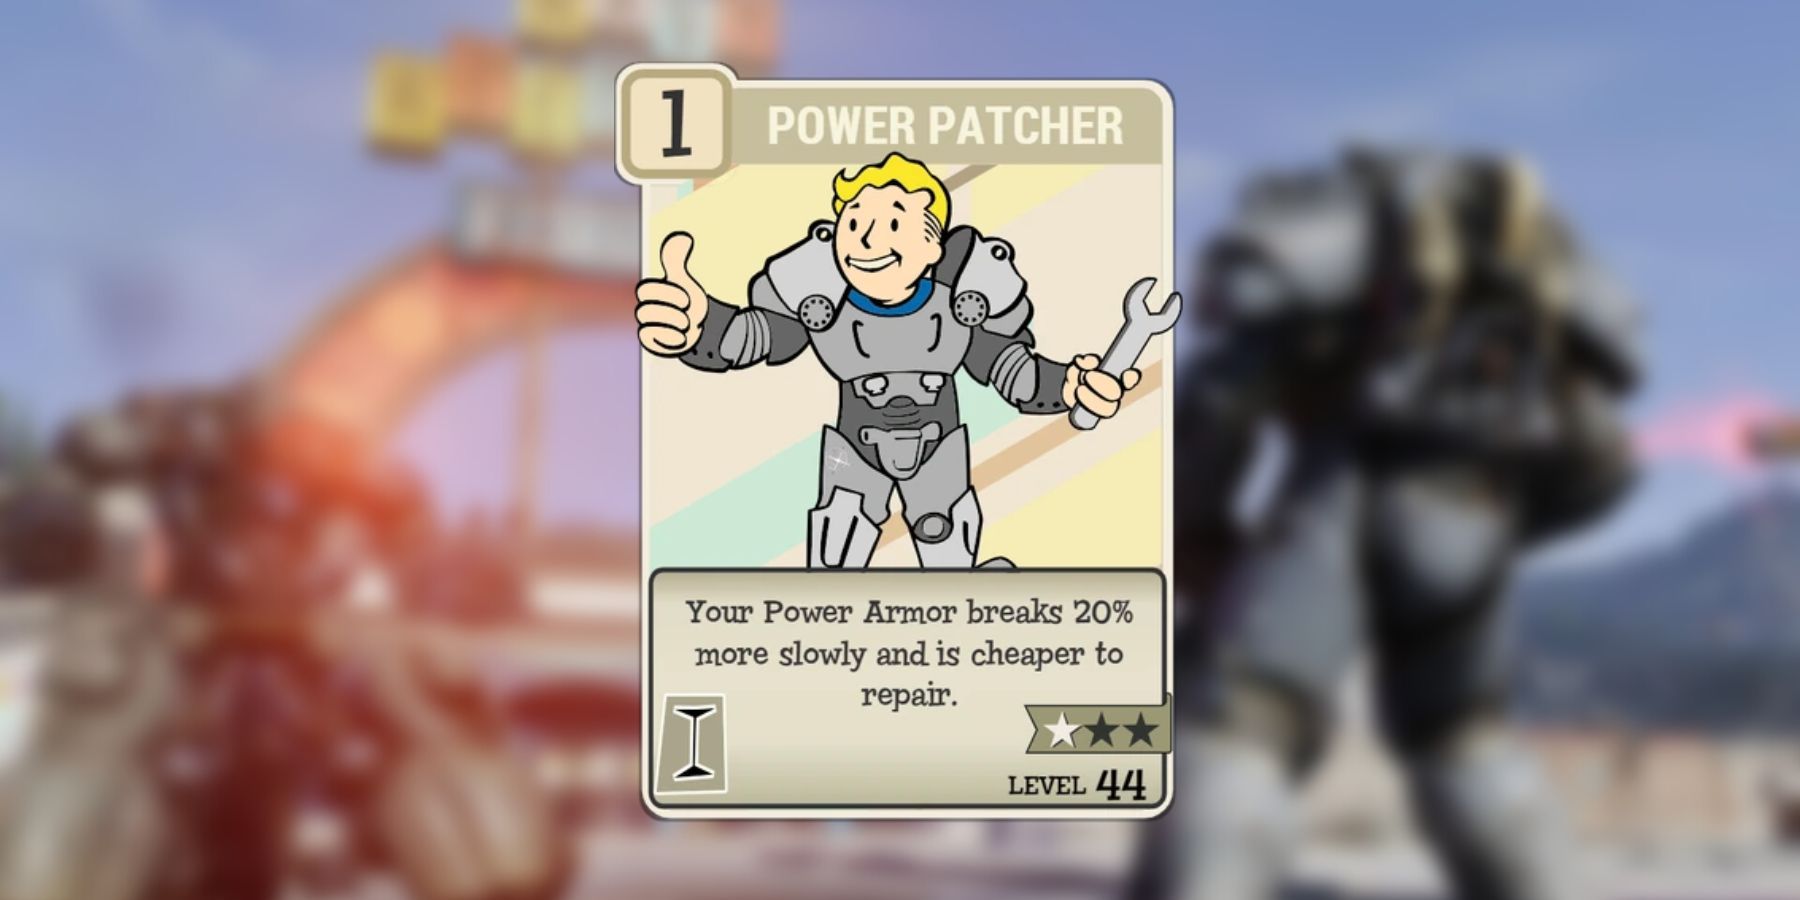 image showing the power patcher perk card for power armor.